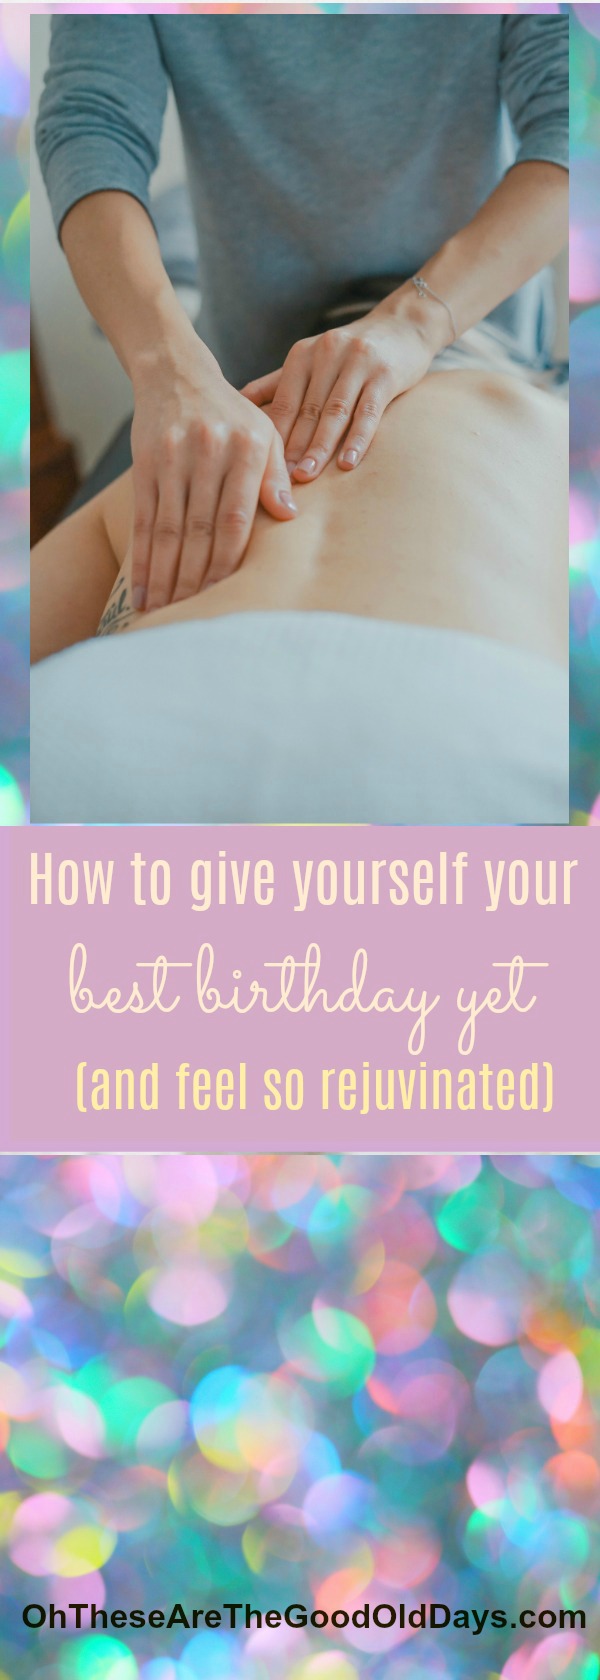 How to Give Yourself Your Best Birthday Yet (and Feel So Rejuvunated)